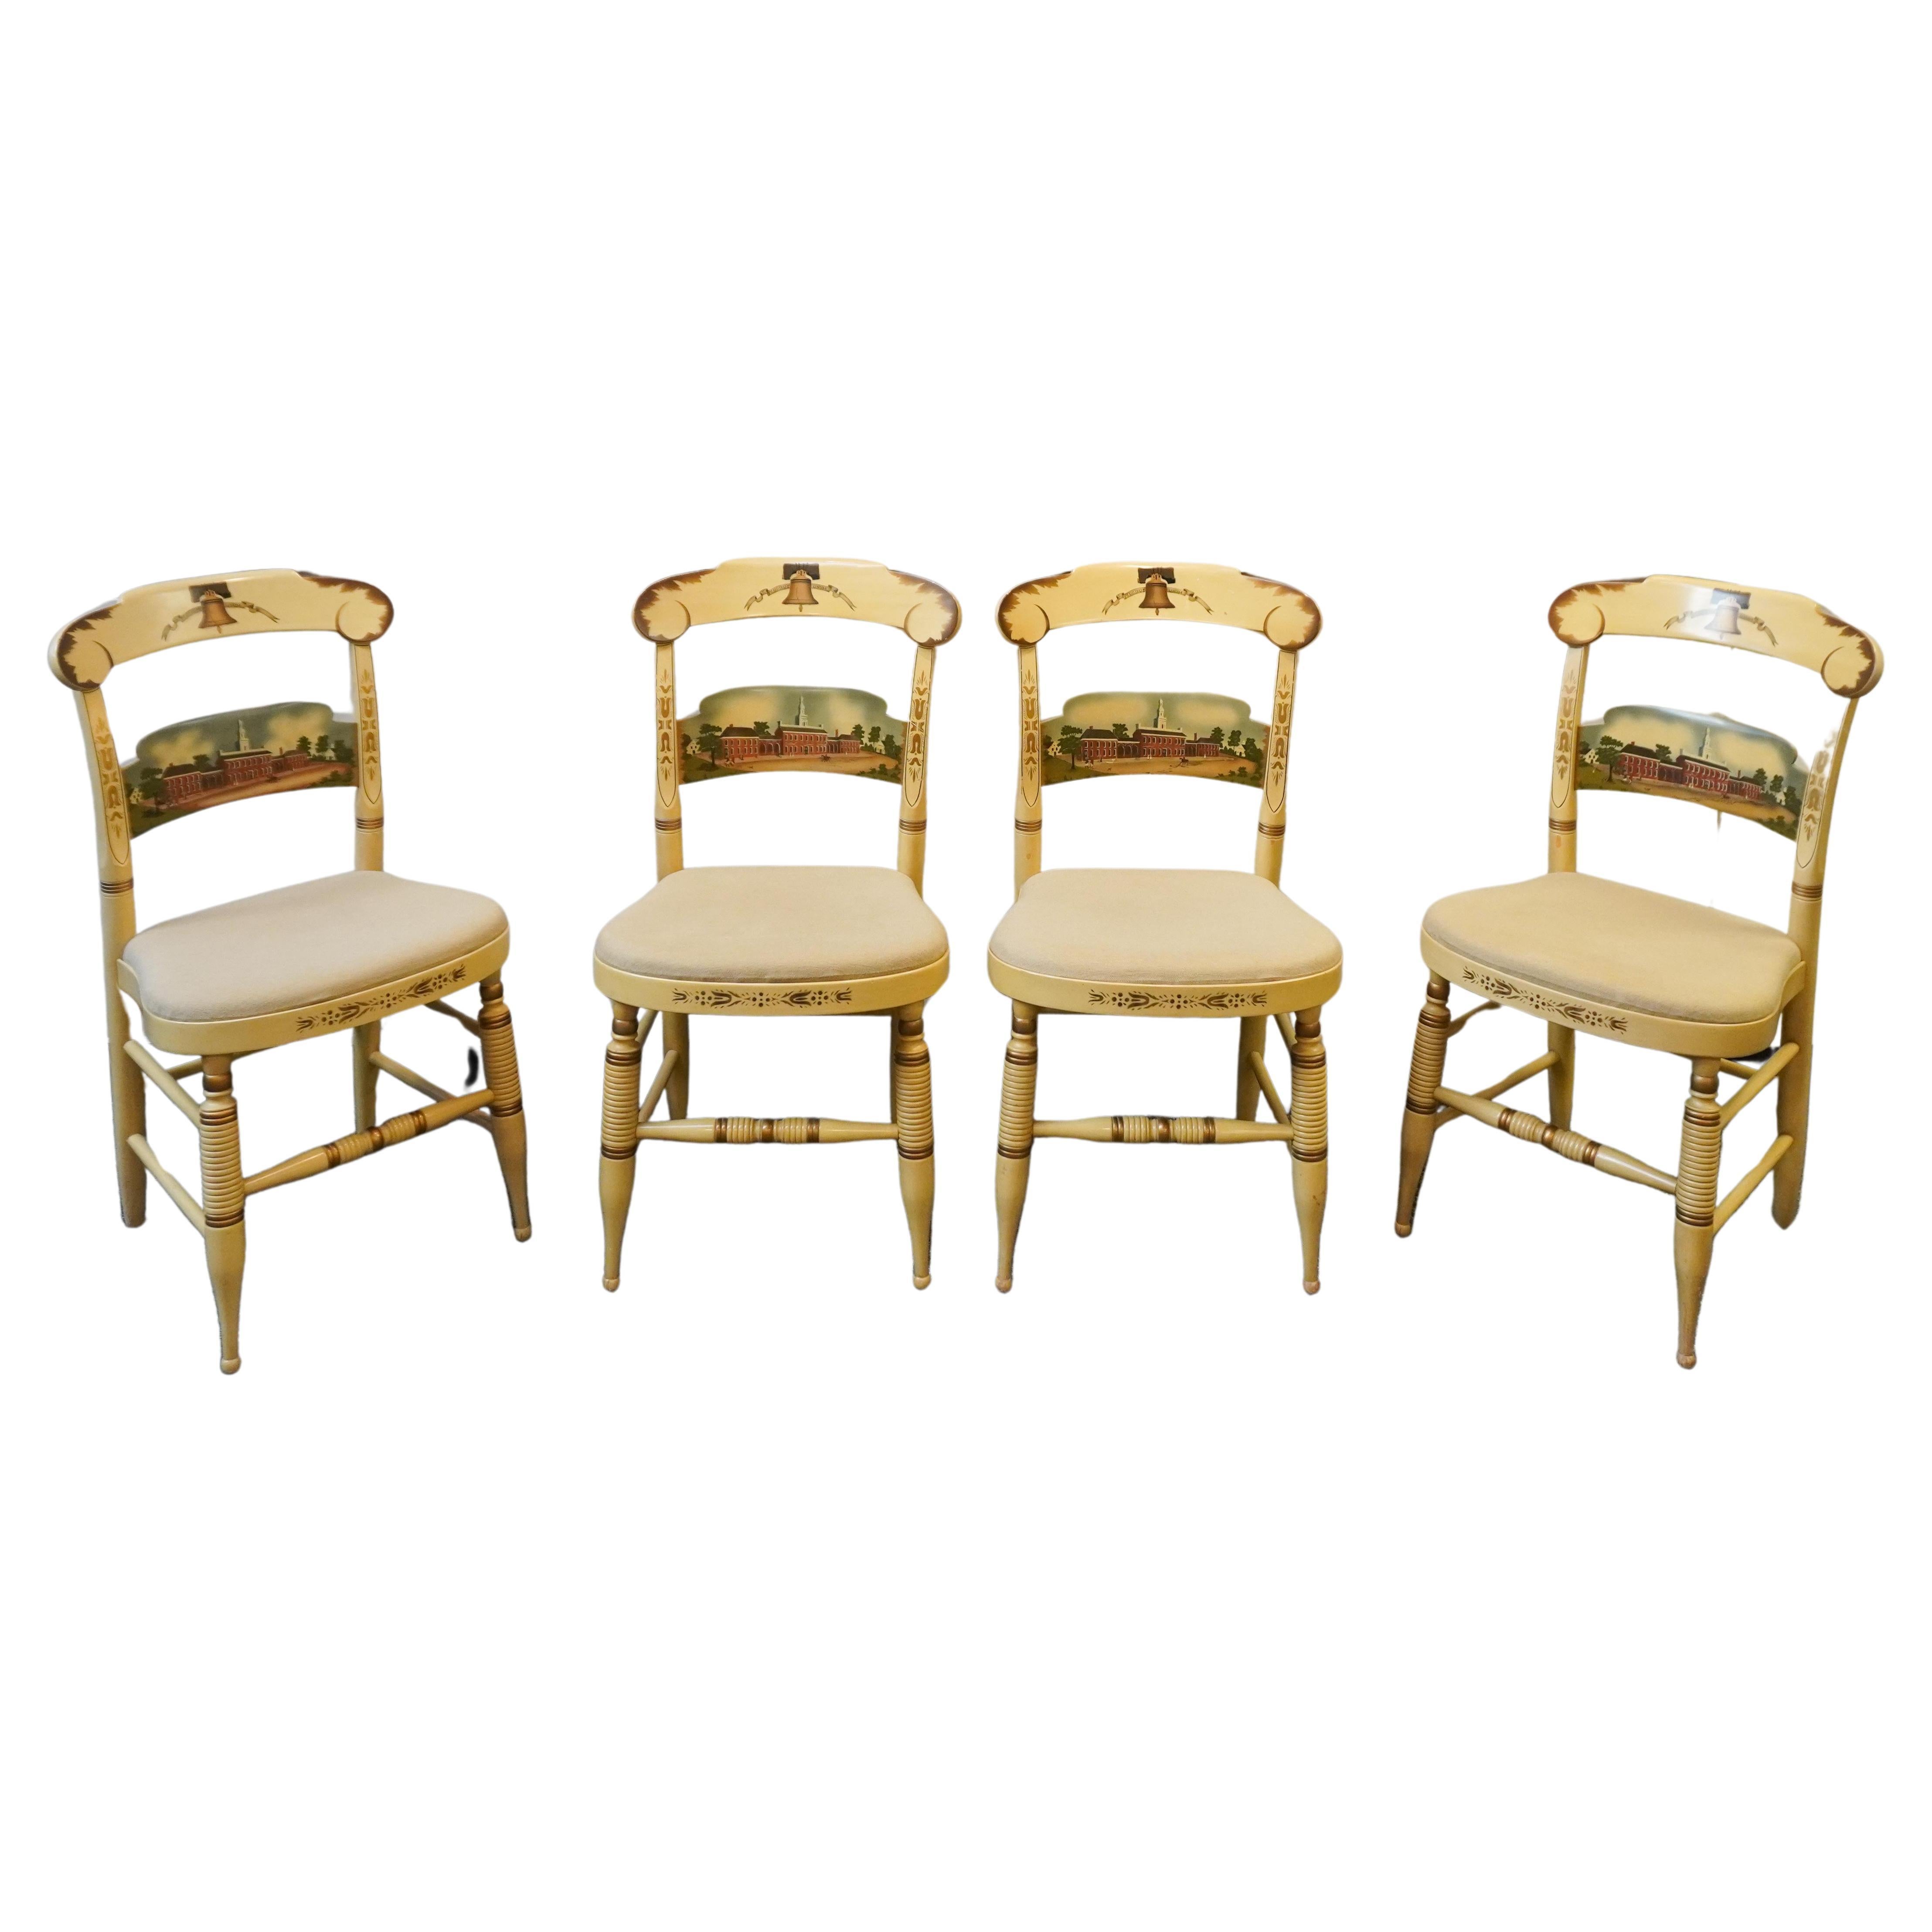 Set 4 Hitchcock For Strawbridge & Clothier 'The Independence Chairs" Ltd Edition